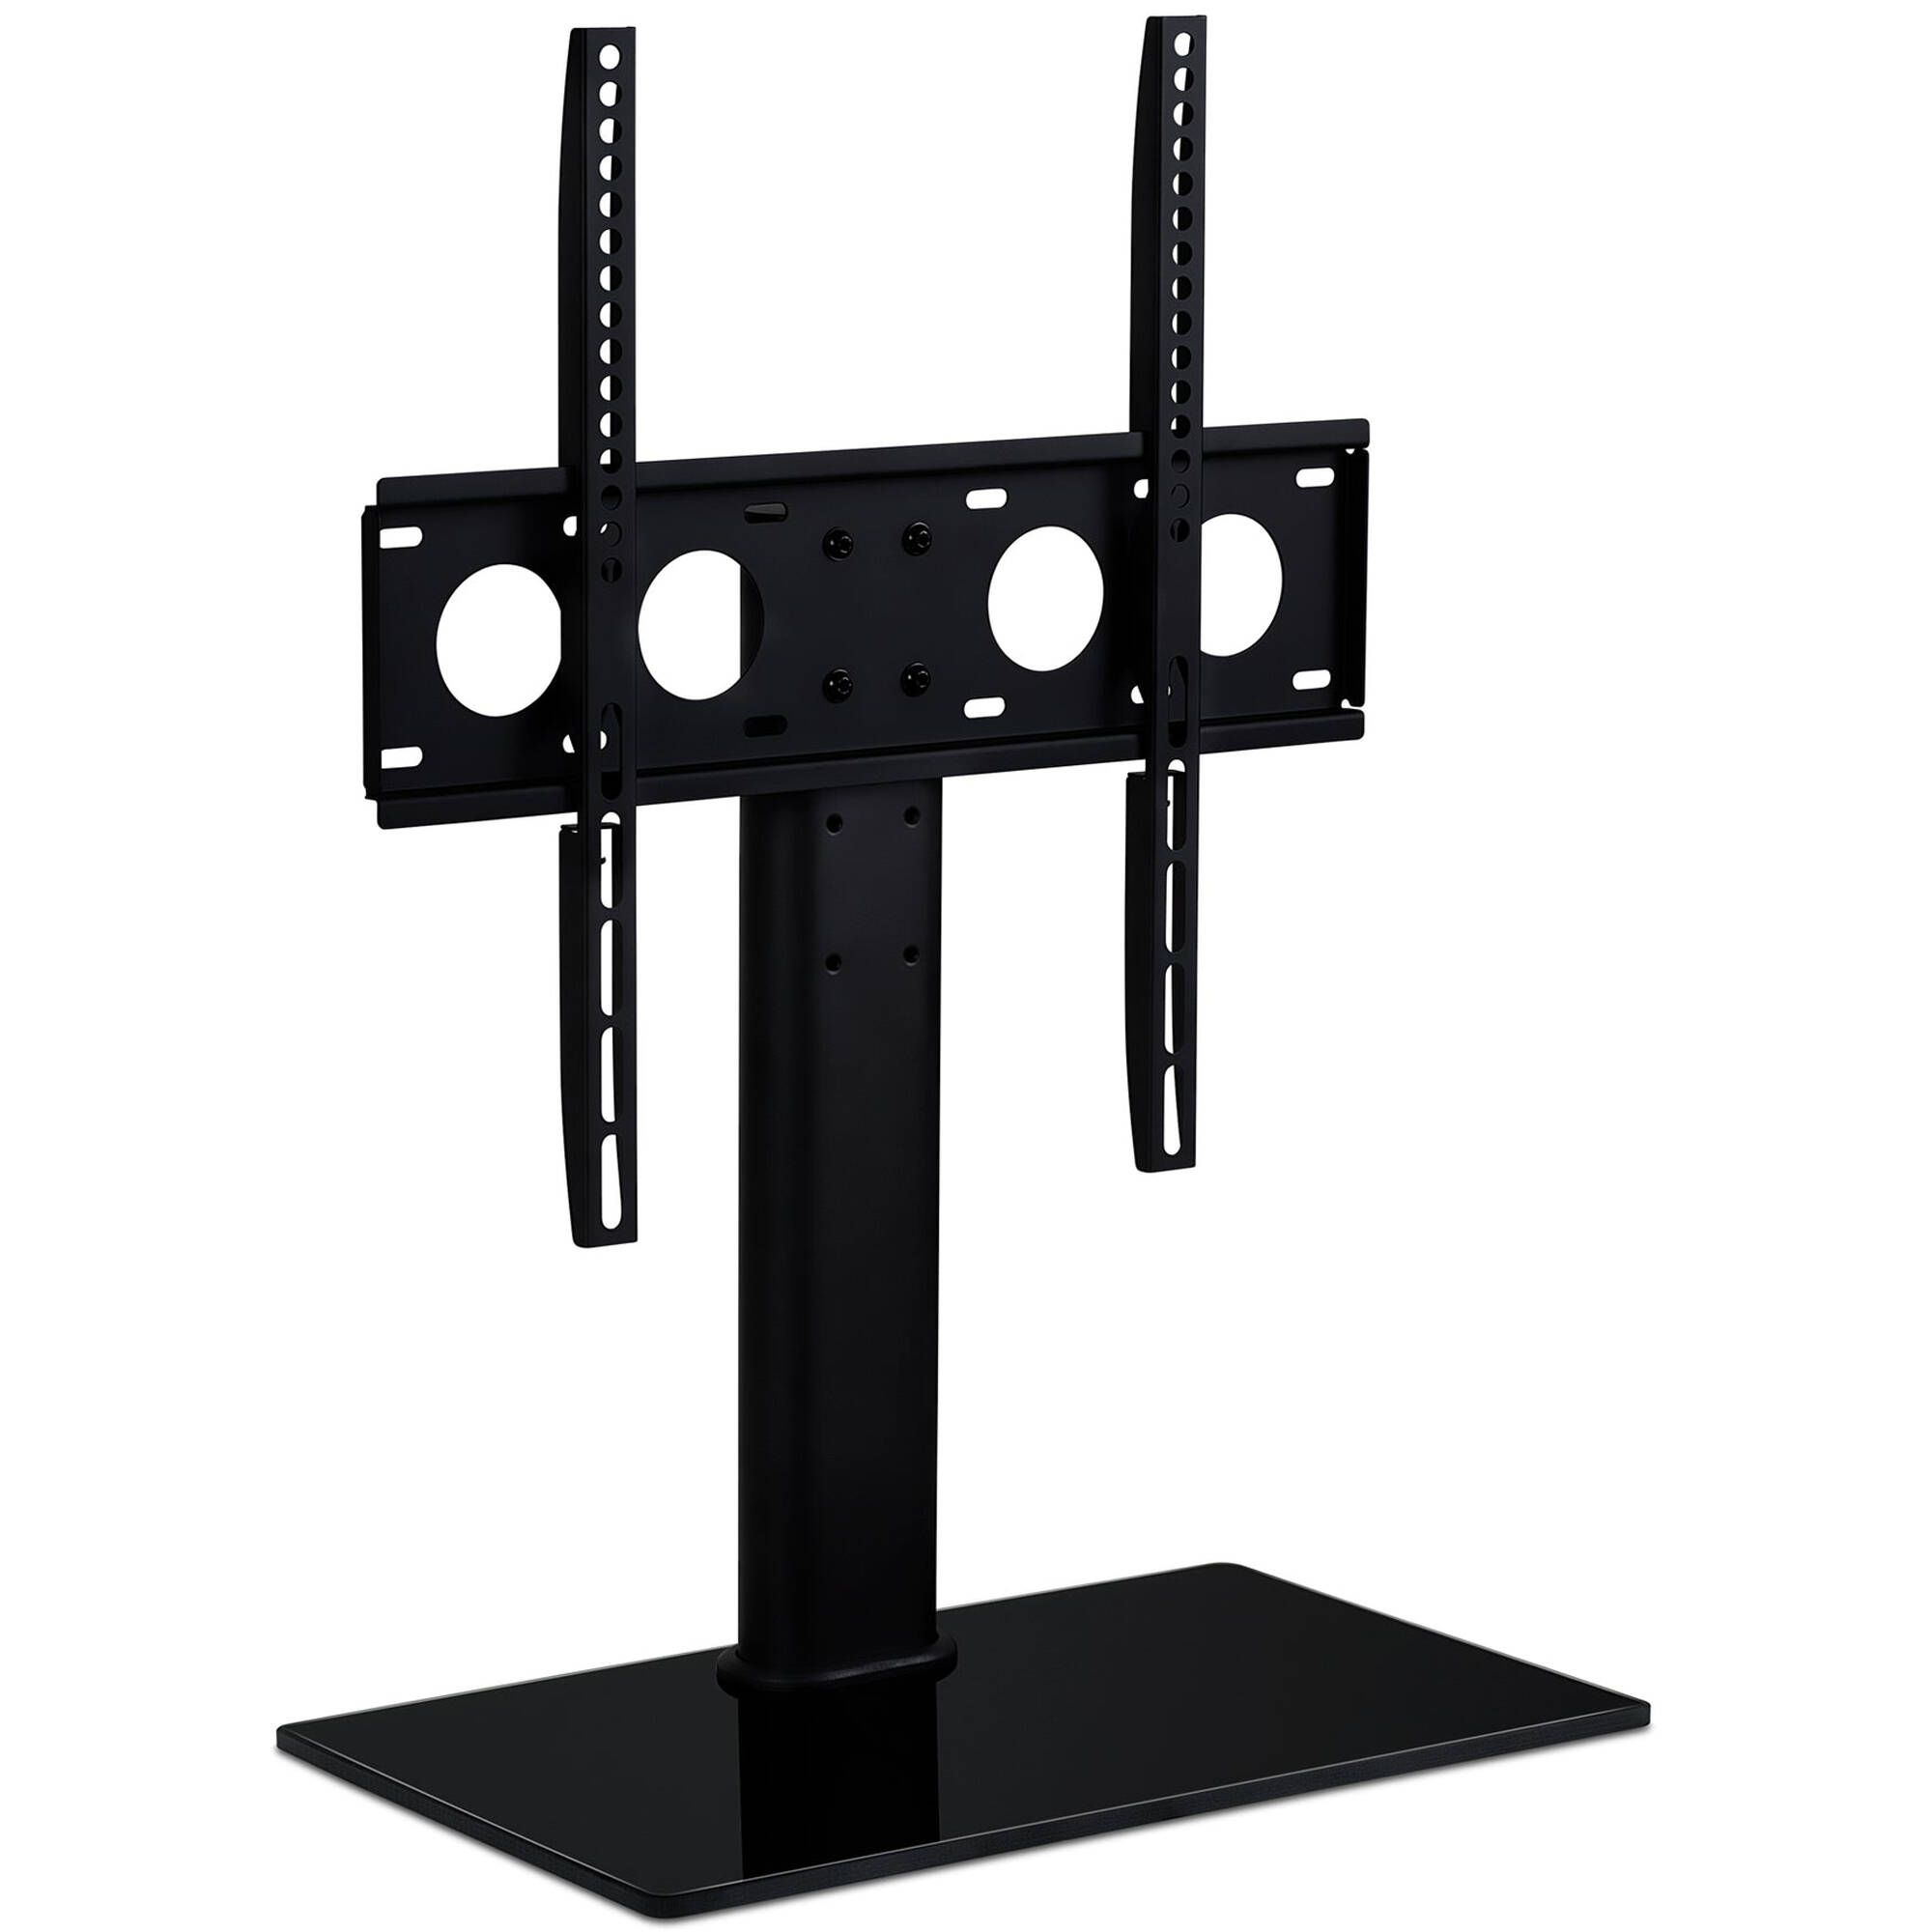 Mount It! Universal Tabletop Tv Stand Mi 847 B&H Photo Video With Regard To Universal Tabletop Tv Stands (View 12 of 15)